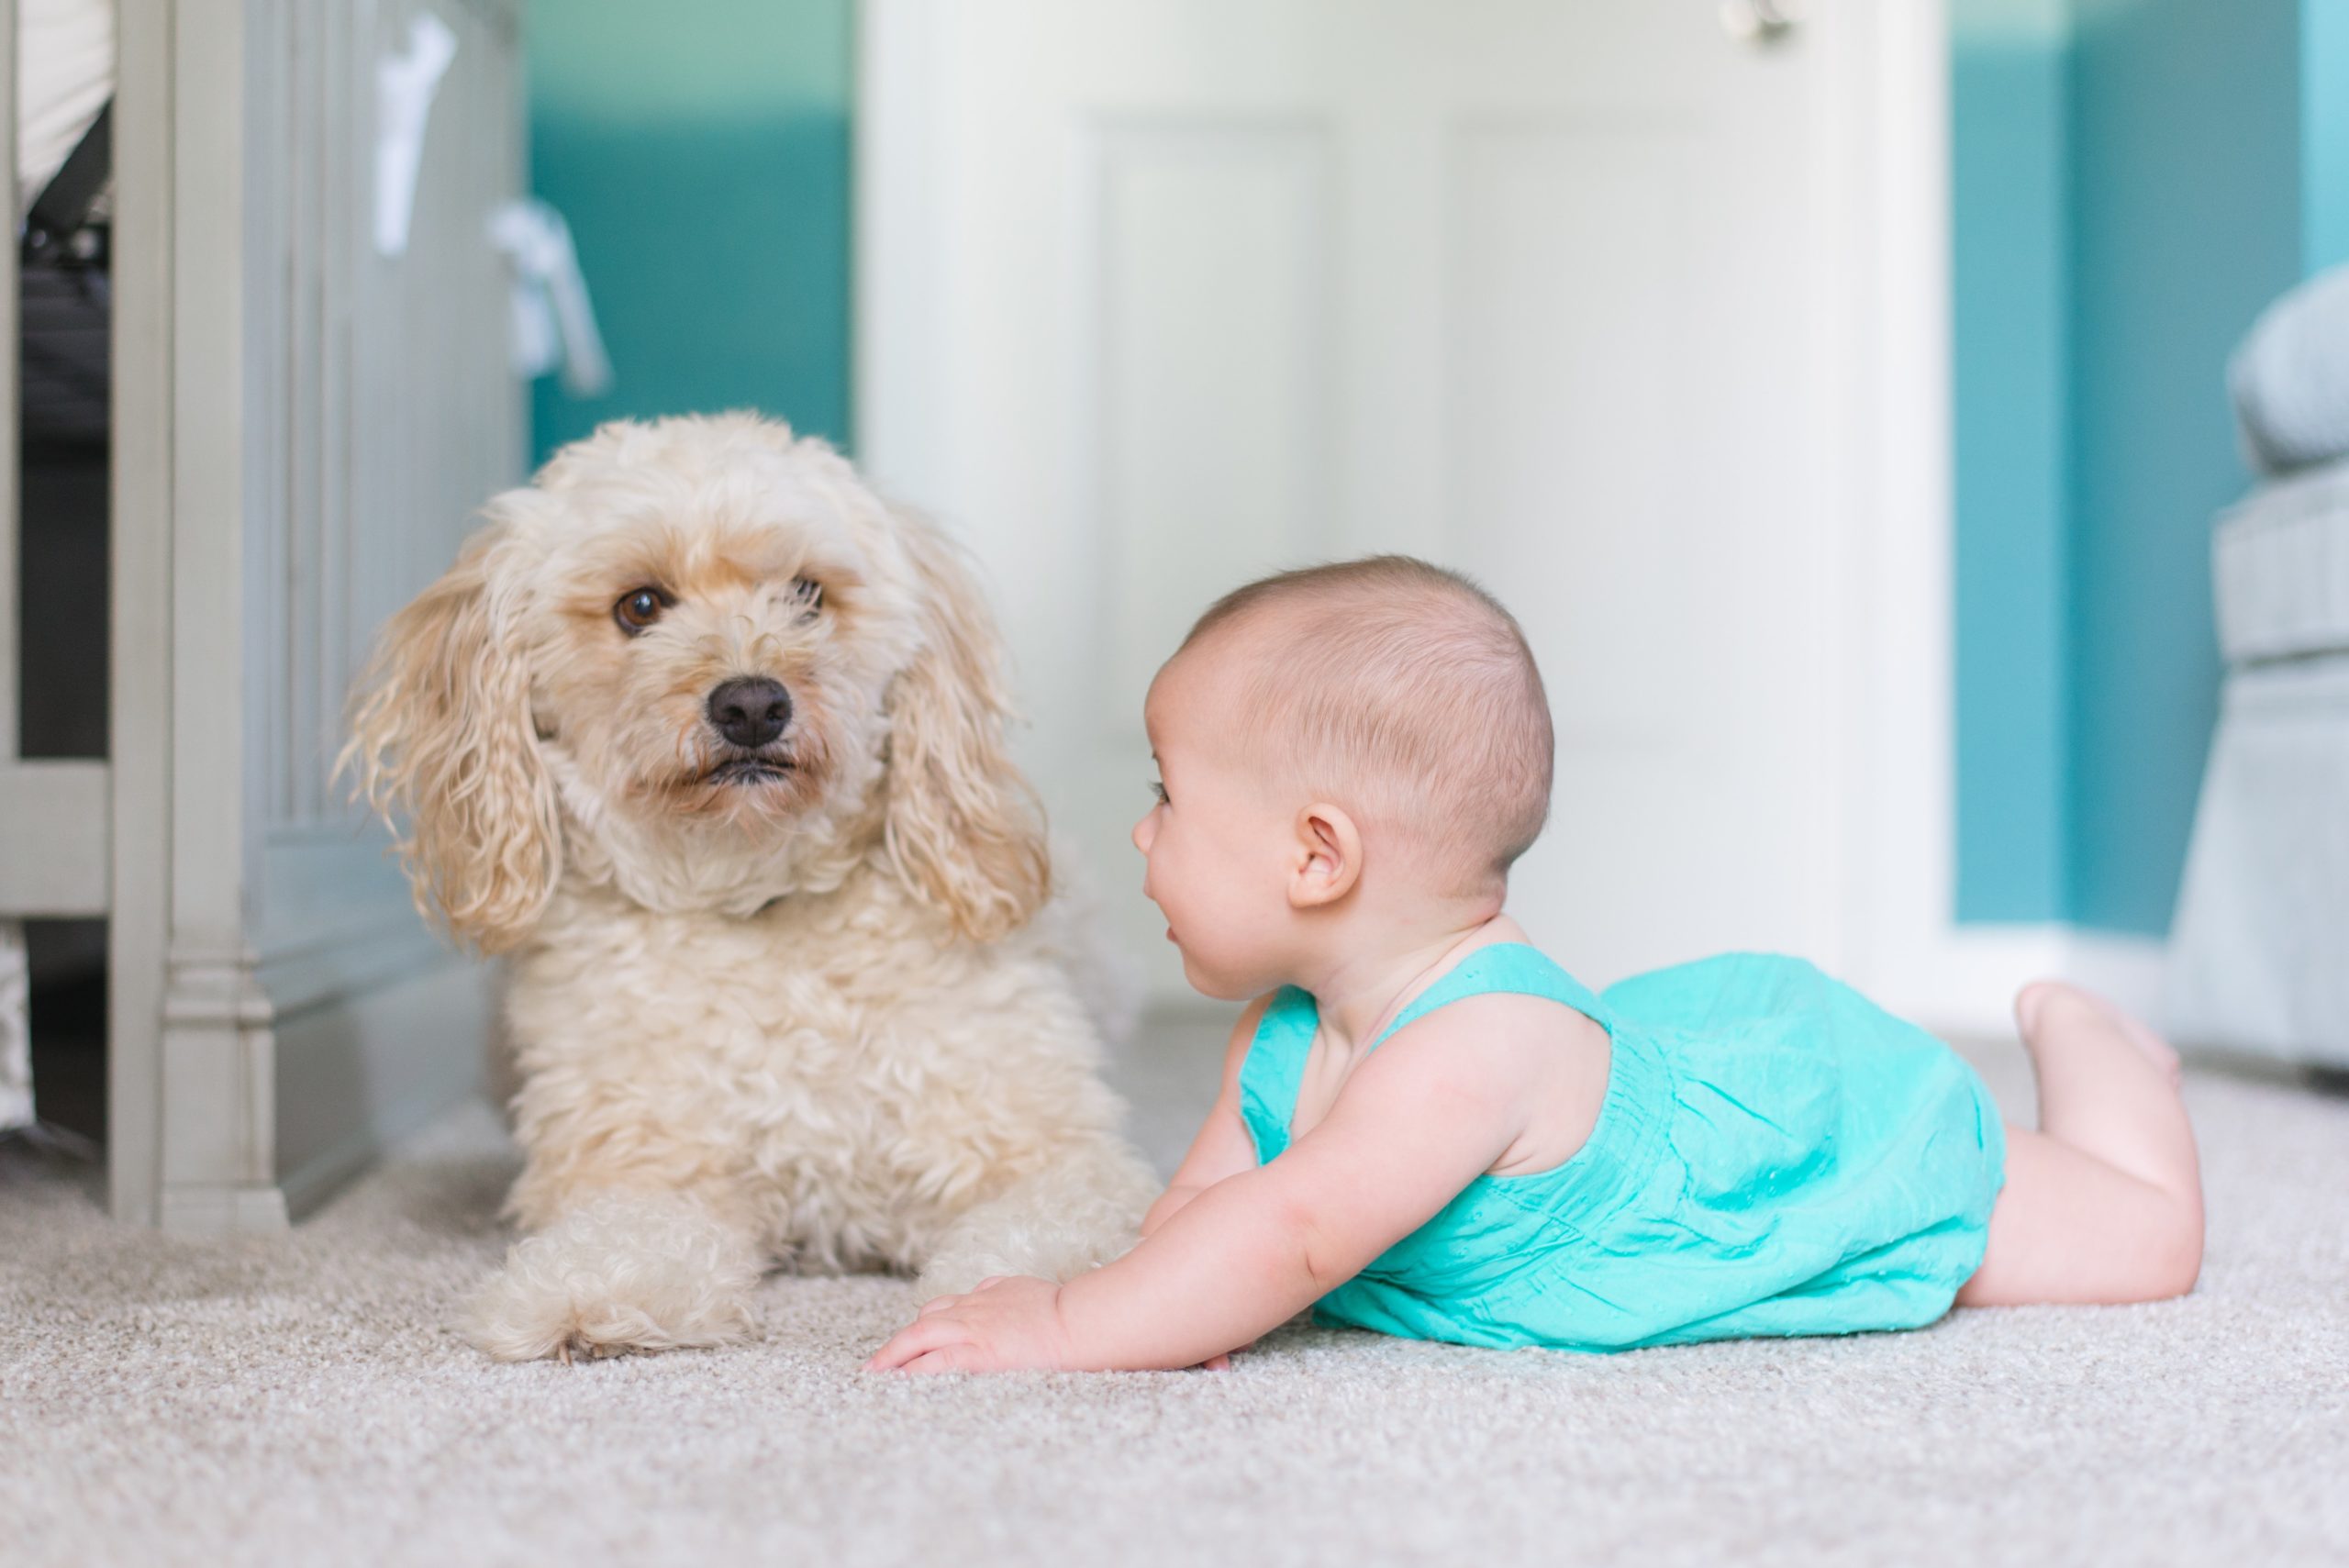 Middle sized dog sitting next to a baby on carpet.